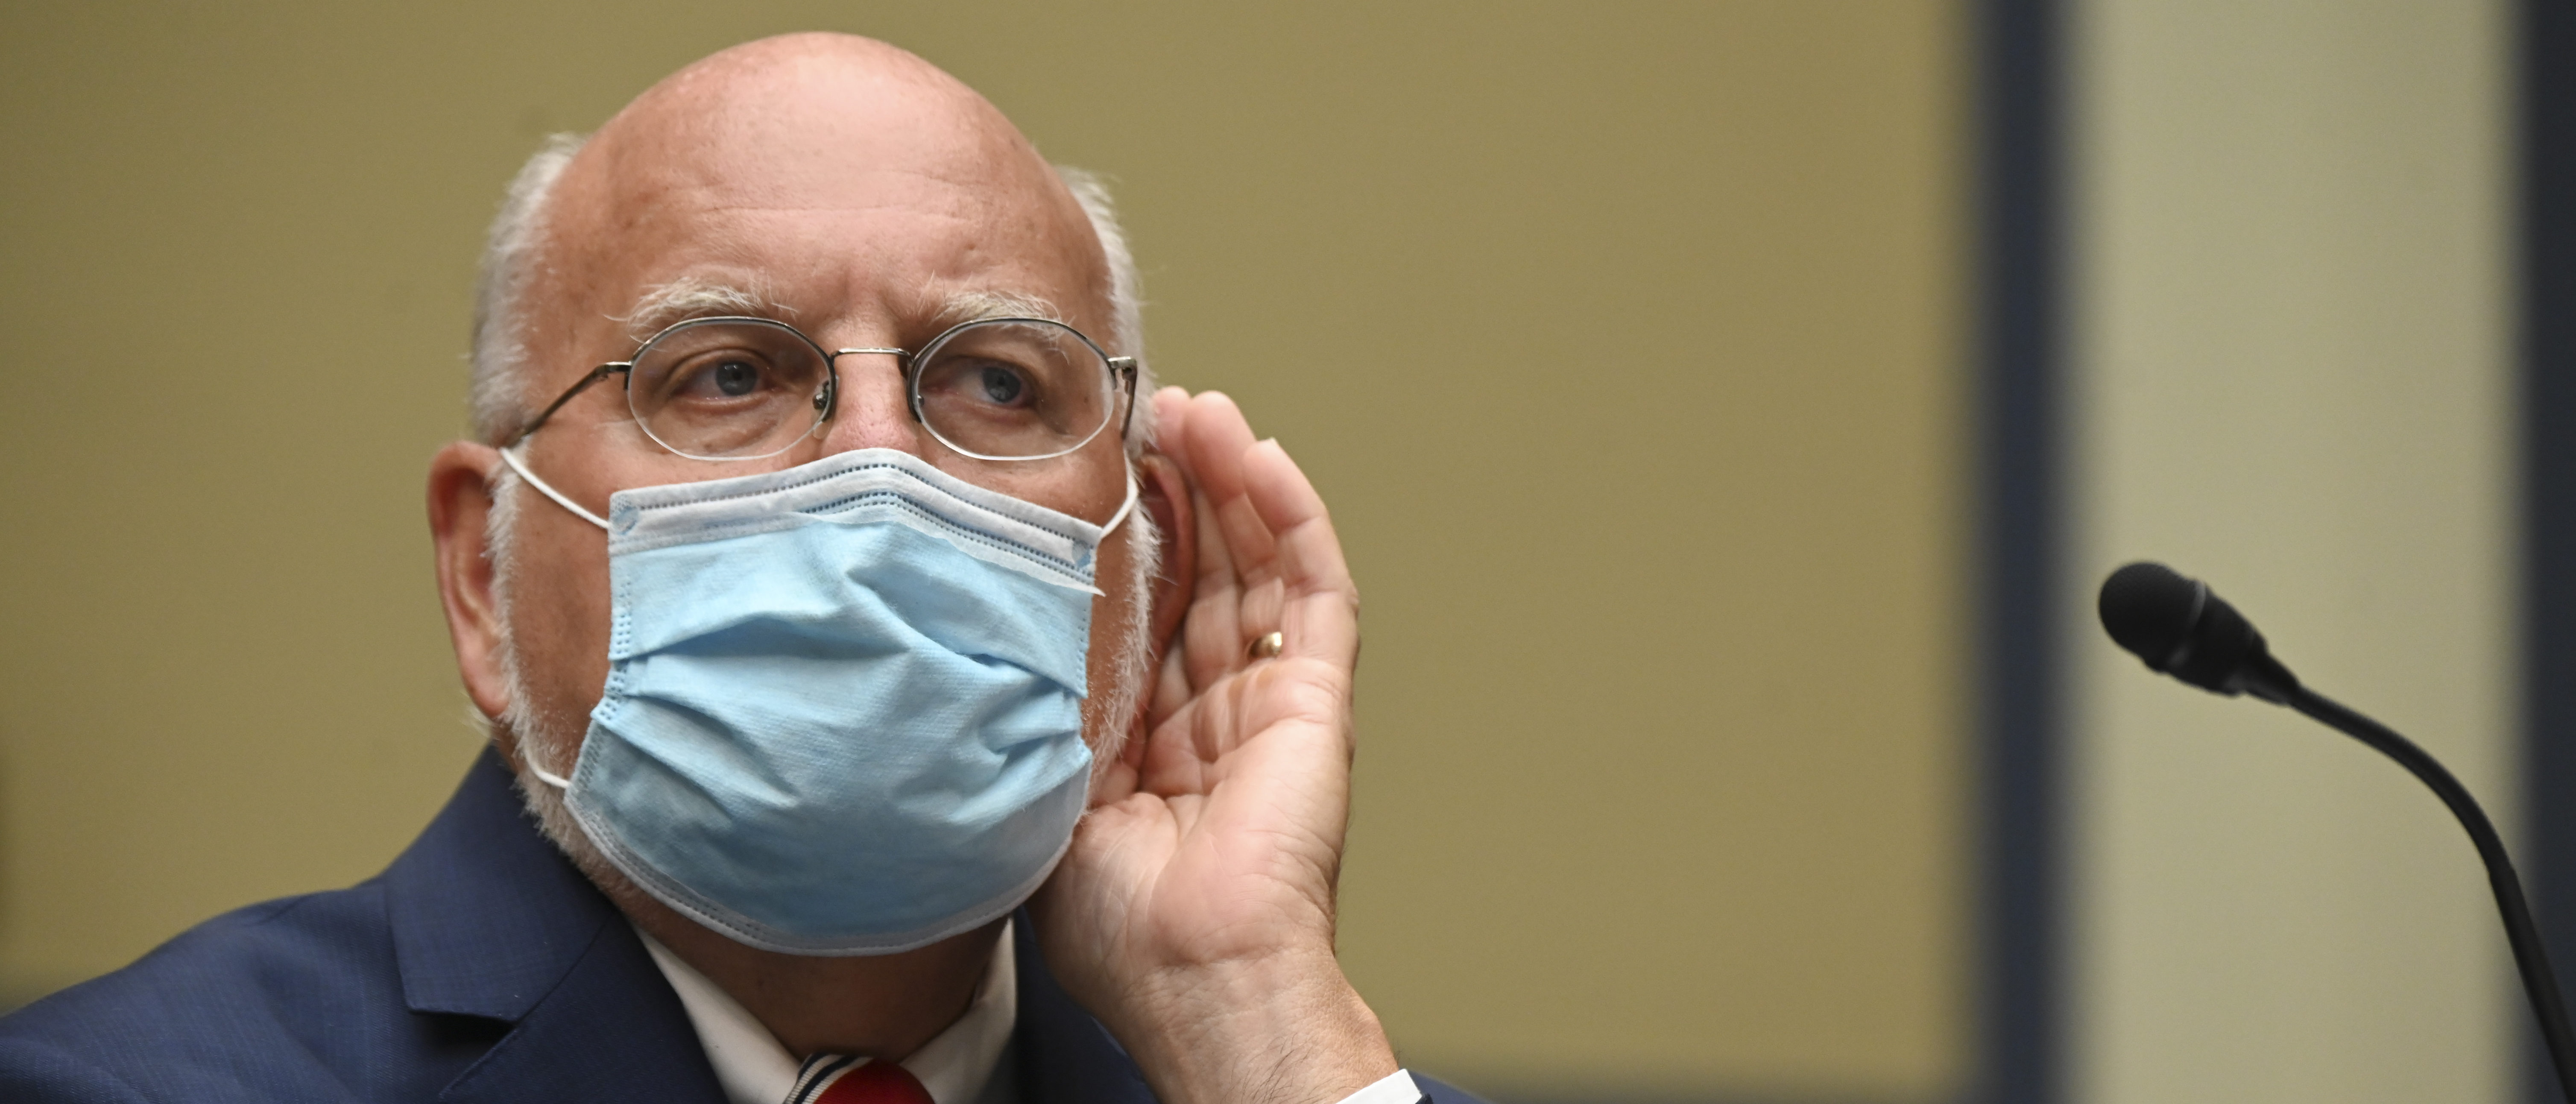 WASHINGTON, DC - JULY 31: Robert Redfield, director of the Centers for Disease Control and Prevention (CDC), wears a protective mask during a House Select Subcommittee on the Coronavirus Crisis hearing on July 31, 2020 in Washington, DC. Trump administration officials are set to defend the federal government's response to the coronavirus crisis at the hearing hosted by a House panel calling for a national plan to contain the virus. (Photo by Erin Scott-Pool/Getty Images)